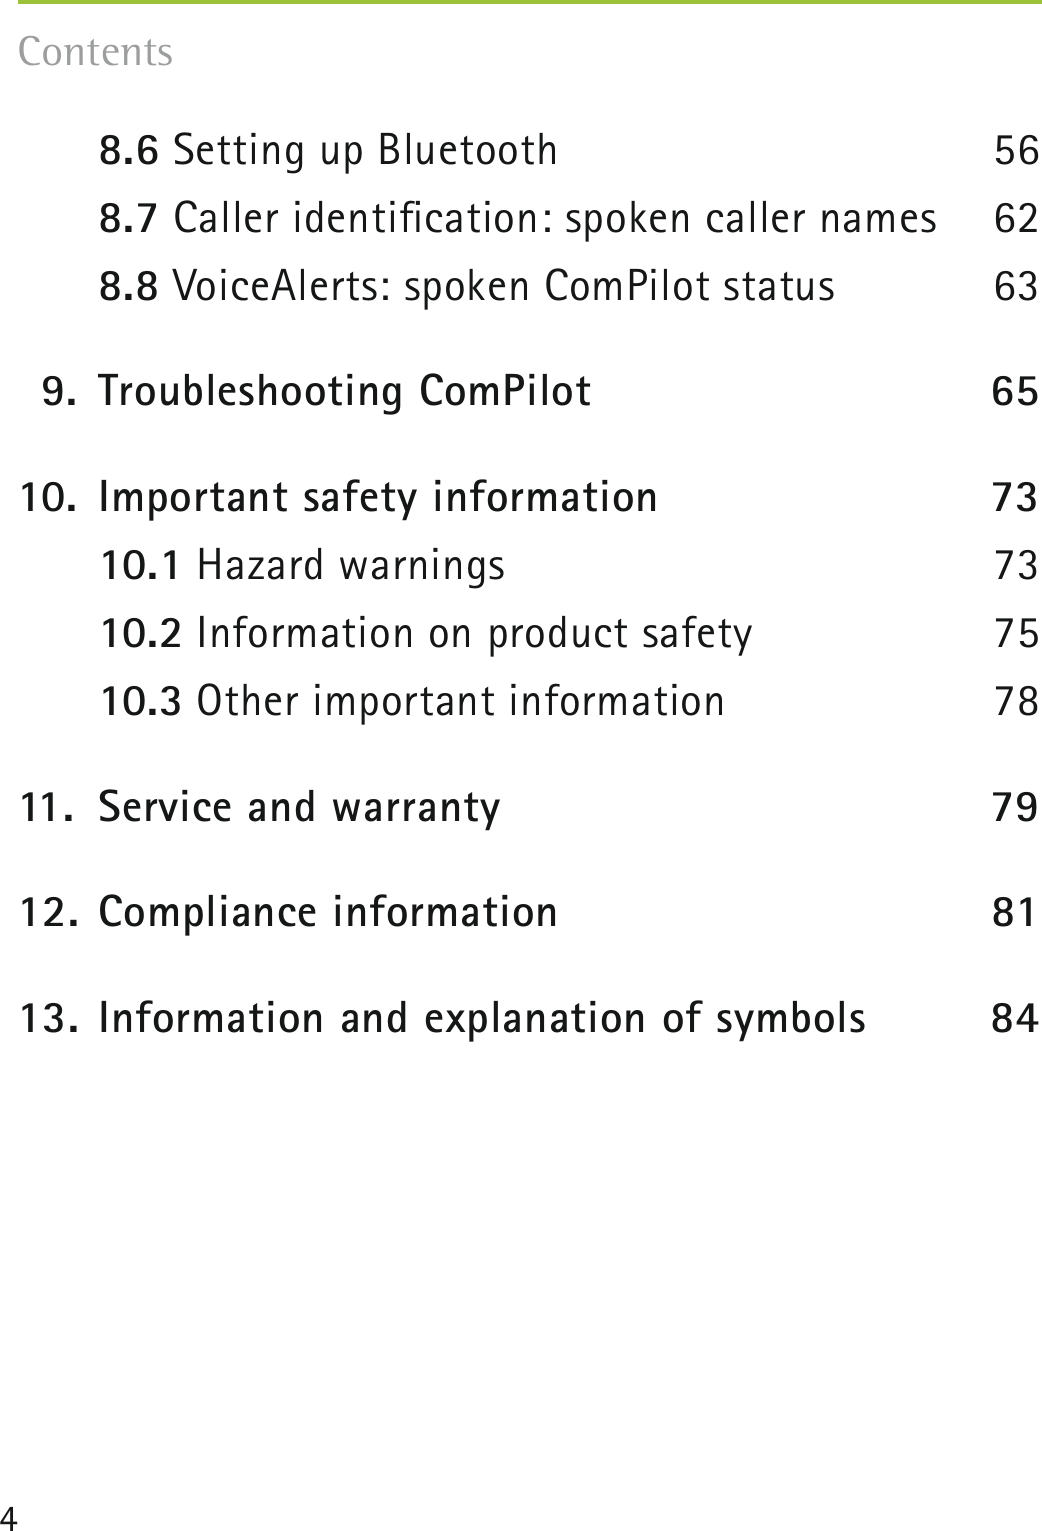 4Contents  8.6 Setting up Bluetooth  56 8.7 Caller identiﬁcation: spoken caller names  62 8.8 VoiceAlerts: spoken ComPilot status  63   9.  Troubleshooting ComPilot  6510.  Important safety information  73 10.1 Hazard warnings  73 10.2 Information on product safety  75 10.3 Other important information  7811.  Service and warranty  7912.  Compliance information  8113.  Information and explanation of symbols  84